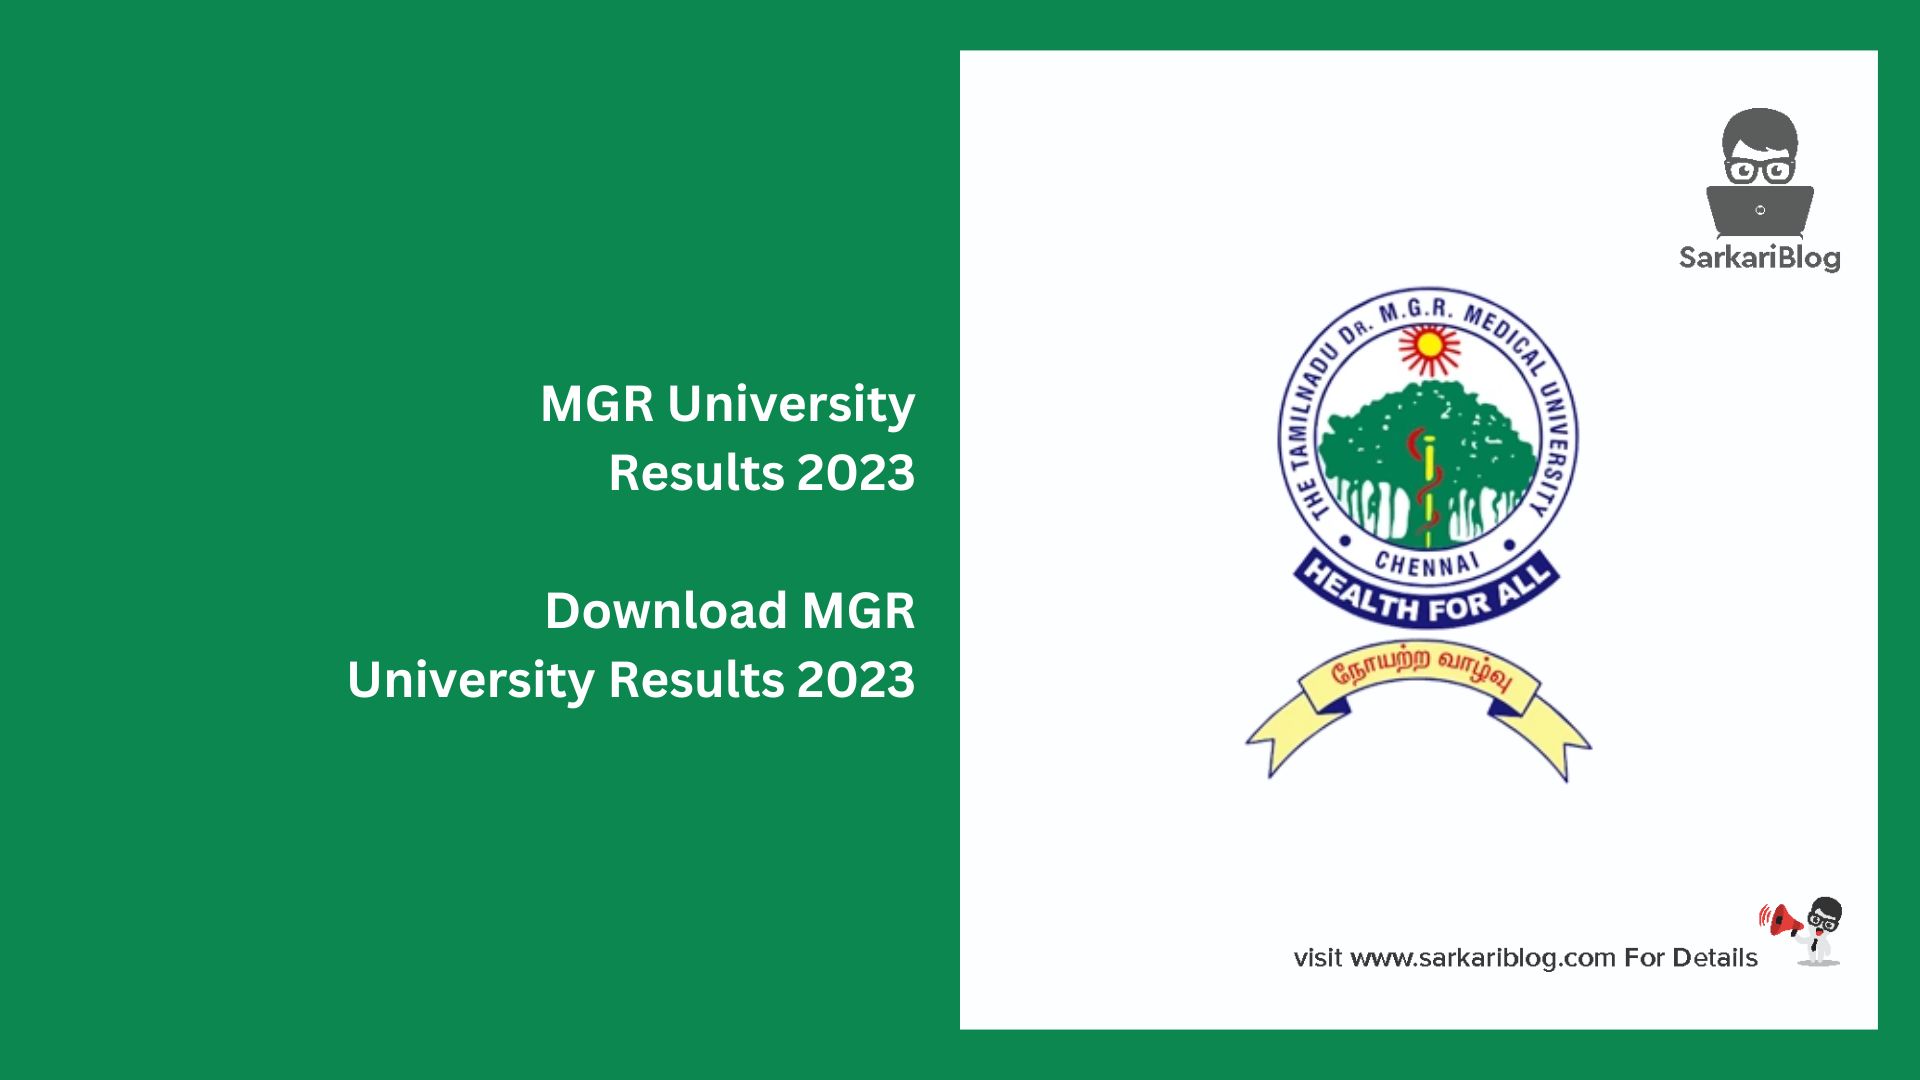 MGR University Results 2023